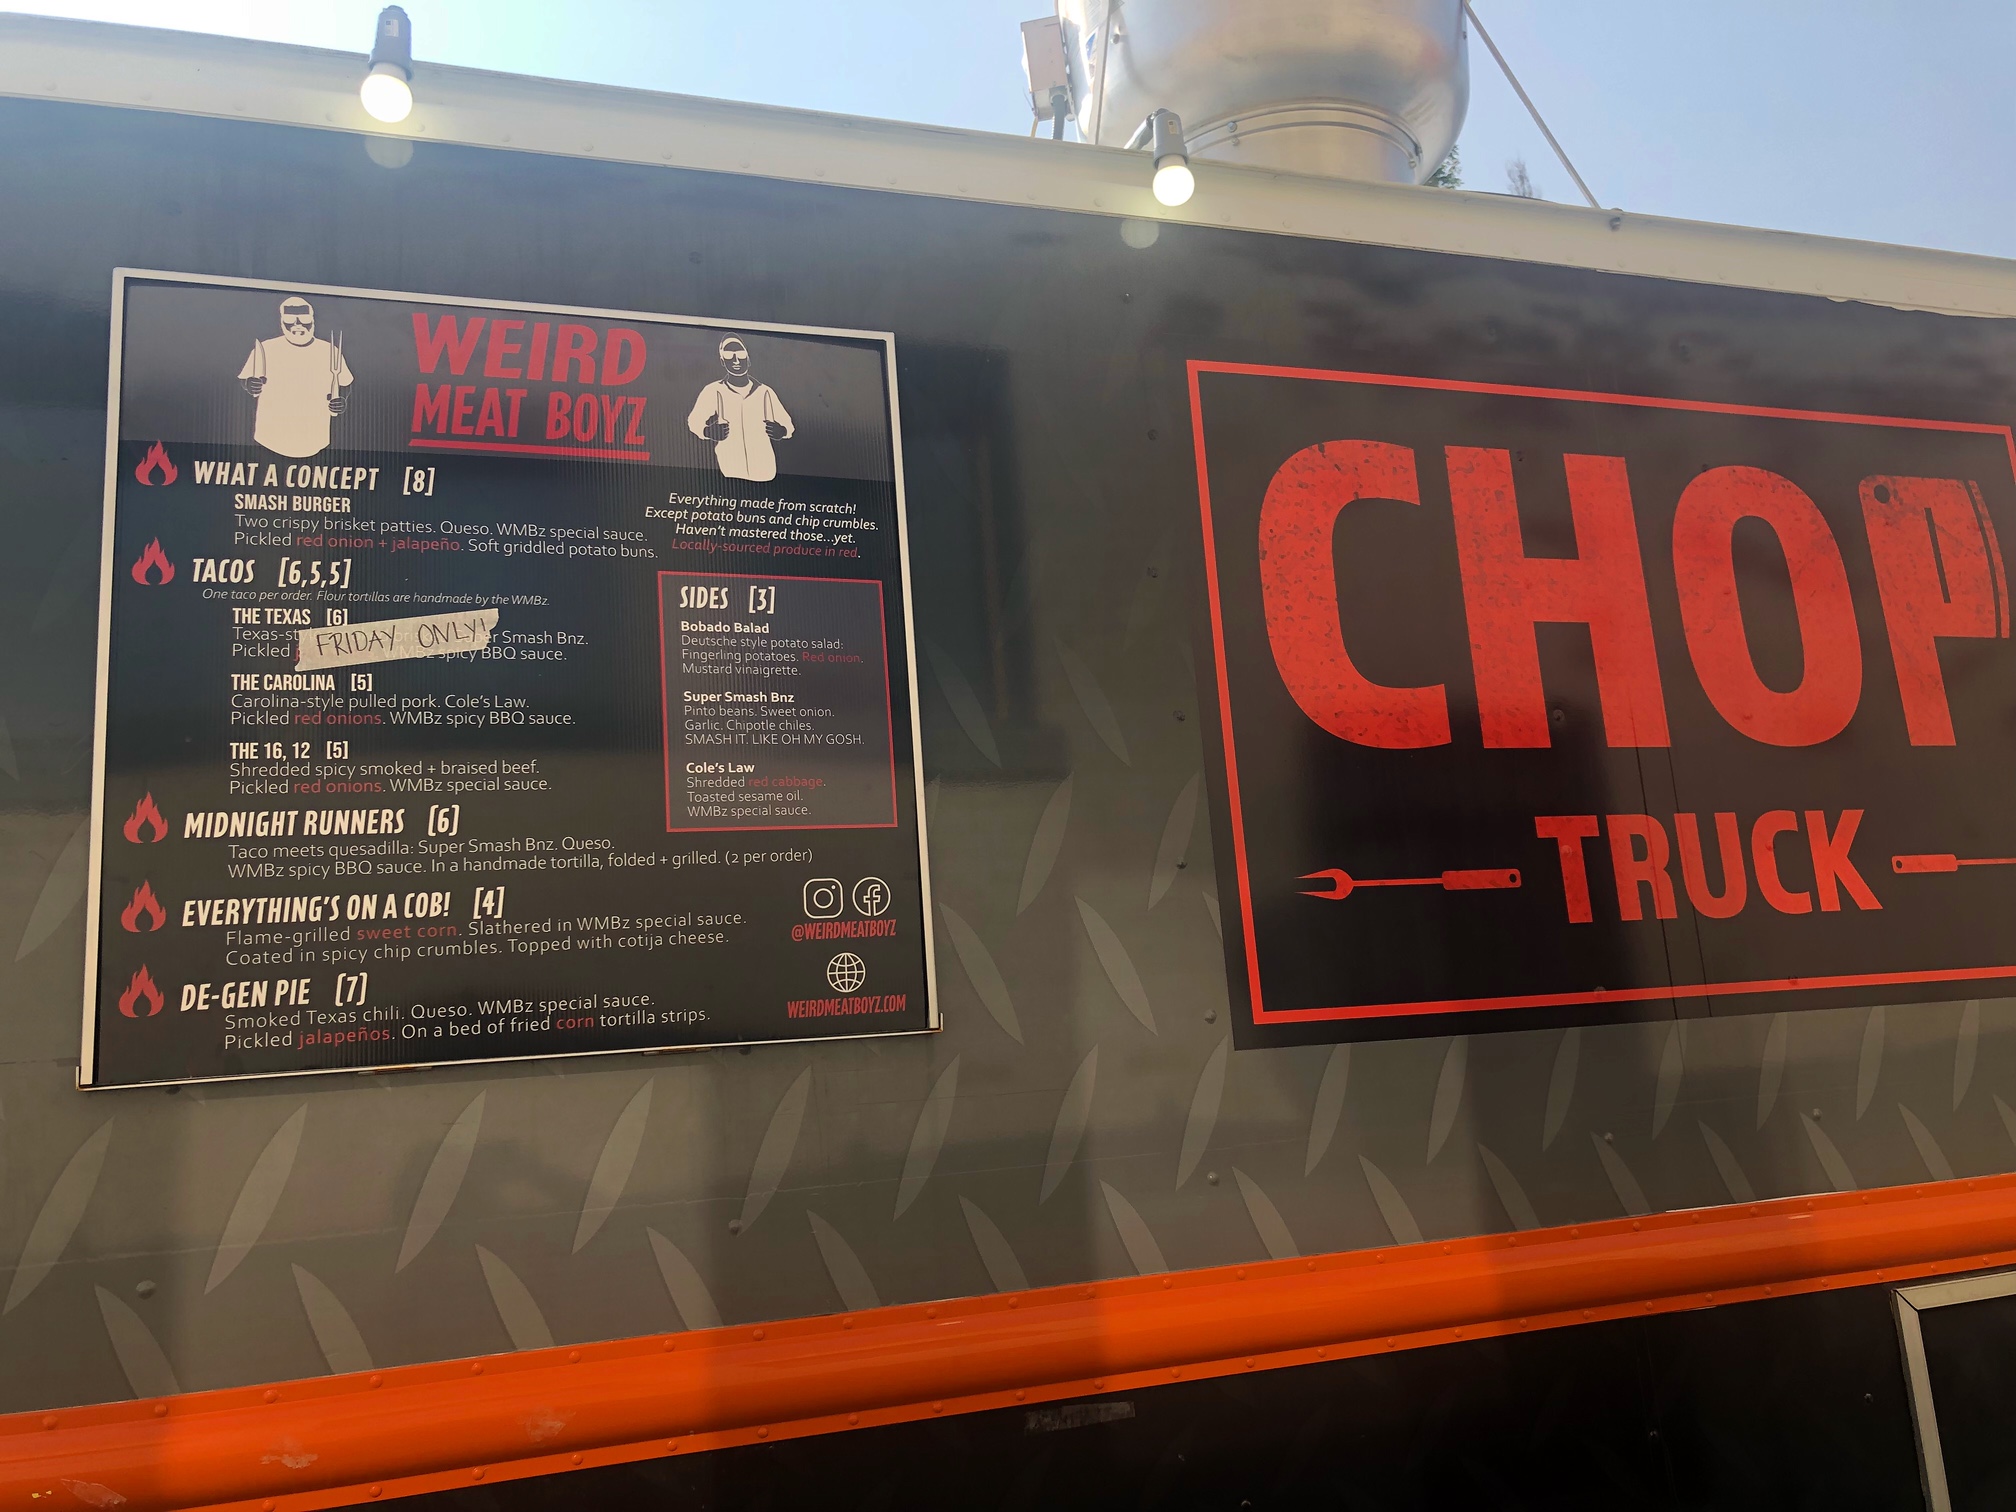 On the side of the pop up Chop Truck, there is the Weird Meat Boyz menu. Photo by Alyssa Buckley.